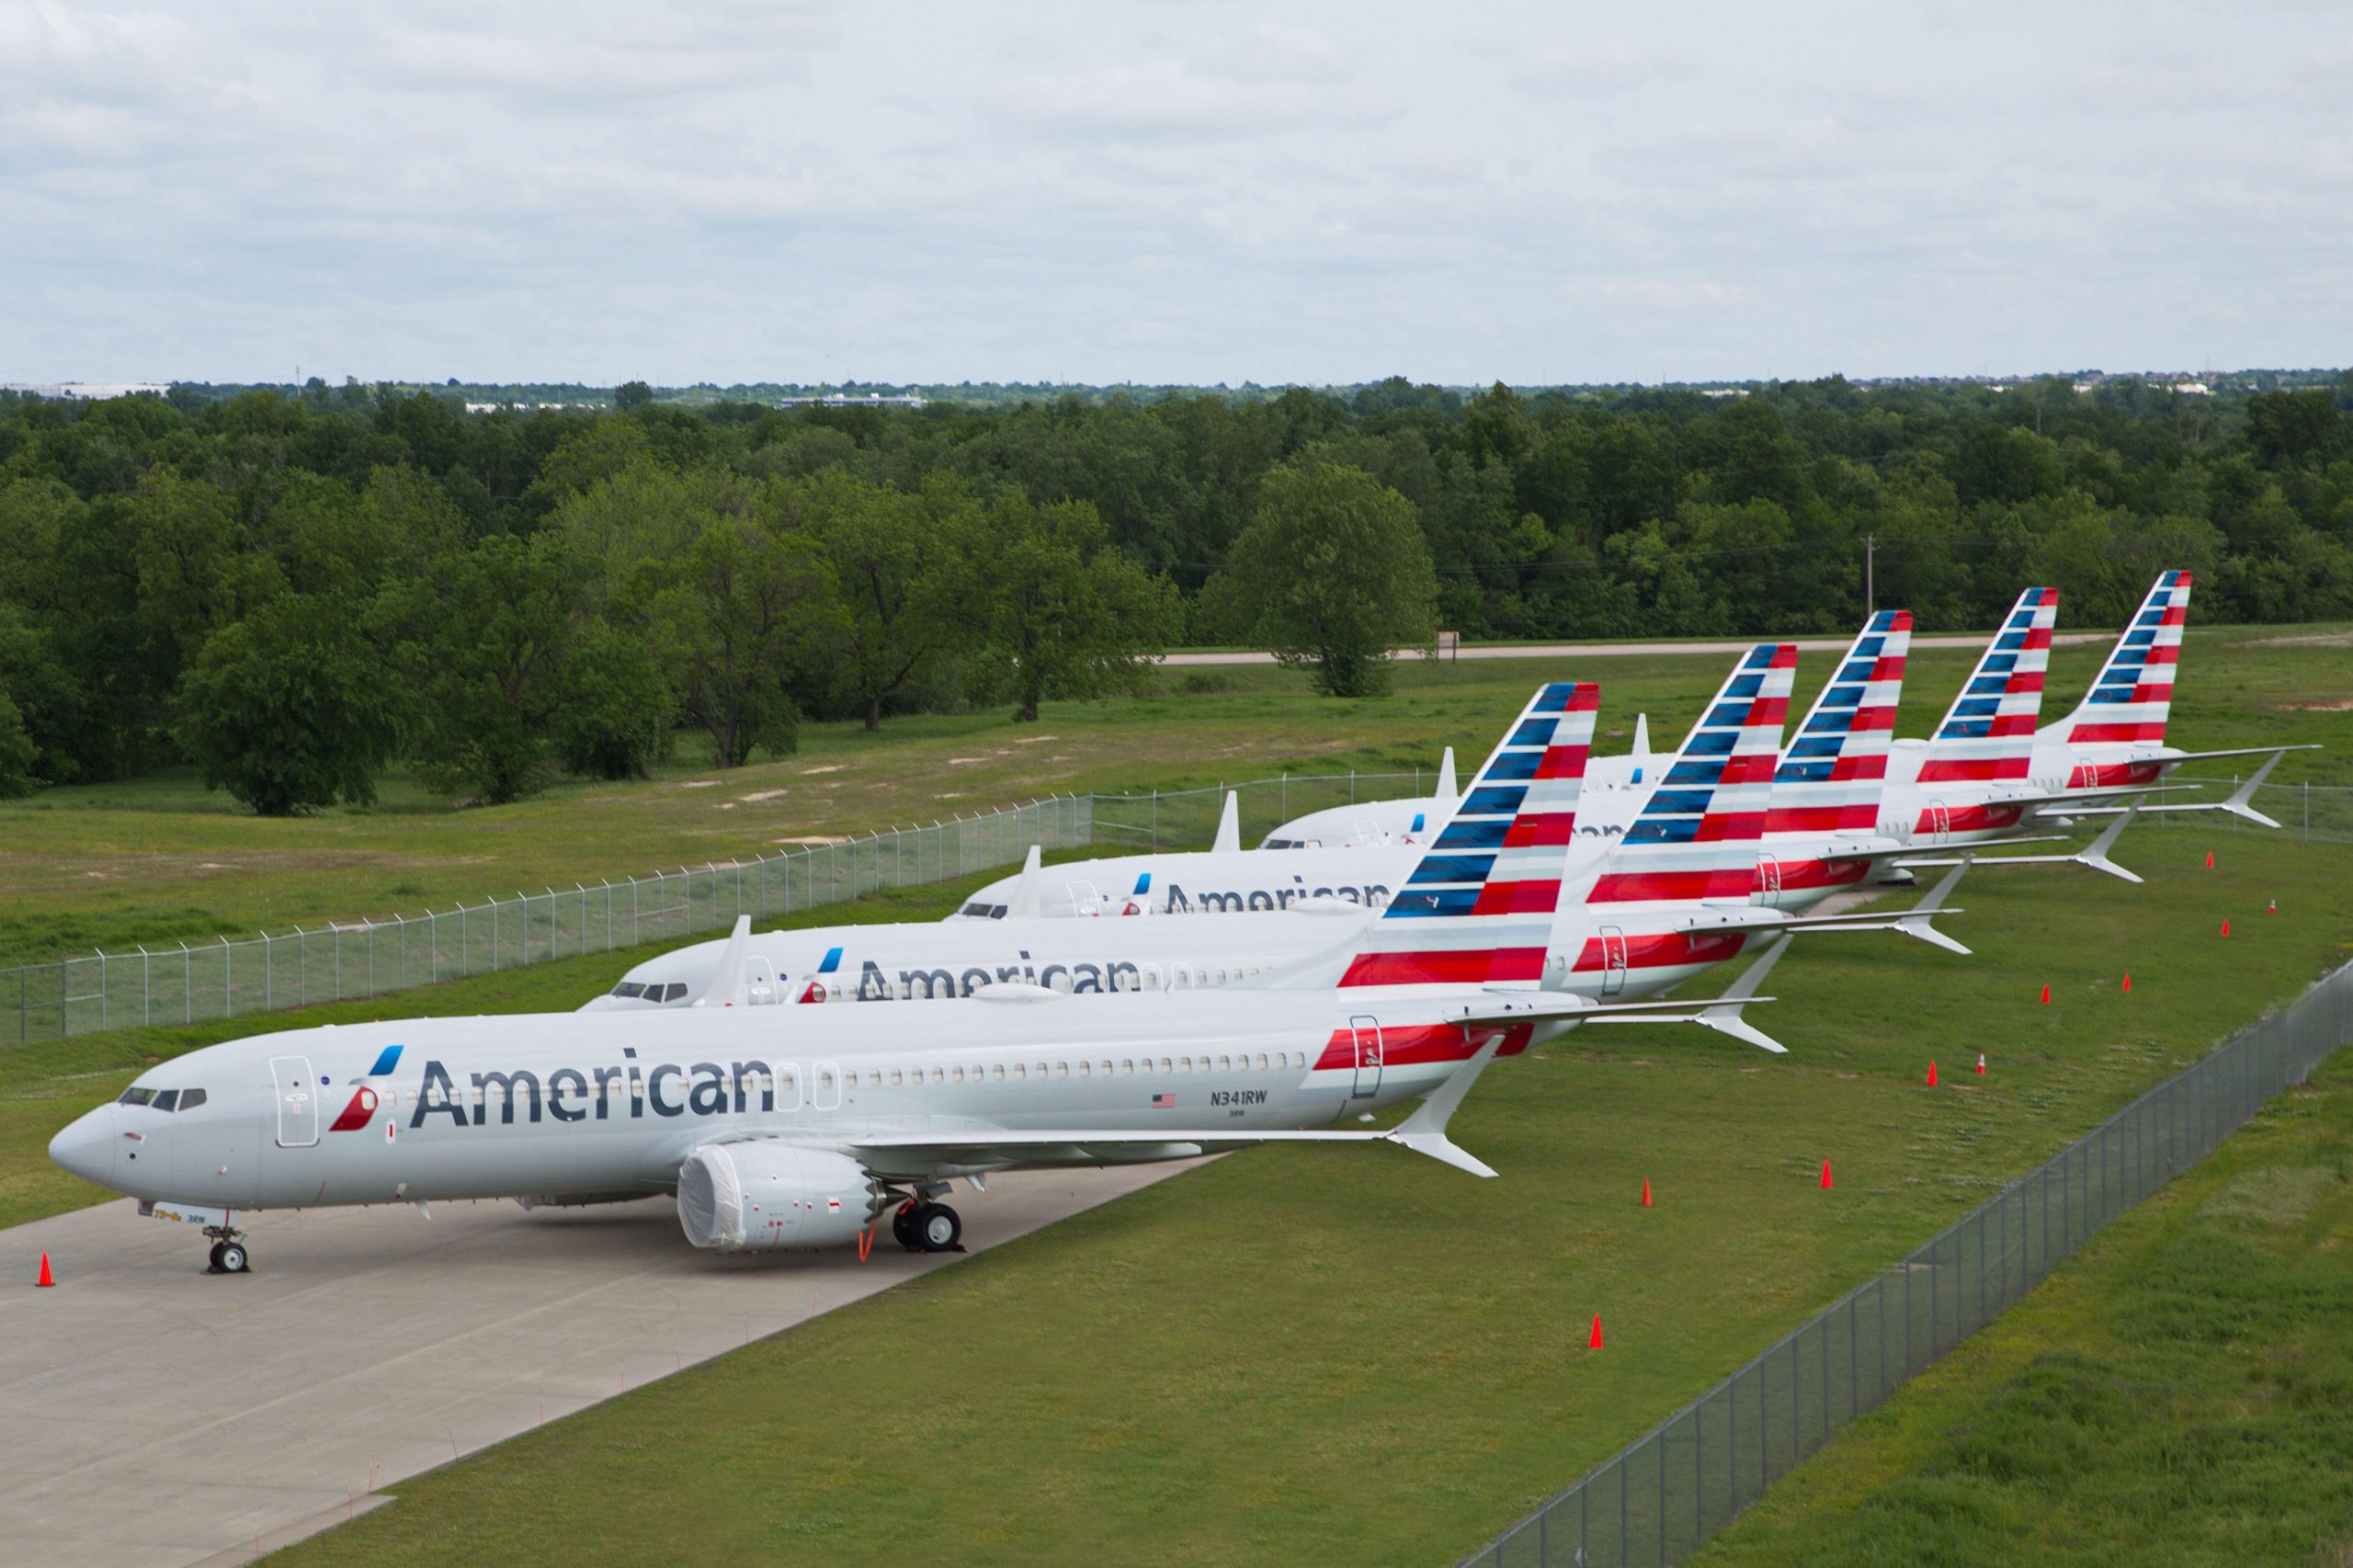 American Airways plans buyer Boeing 737 Max excursions to construct confidence in grounded jet